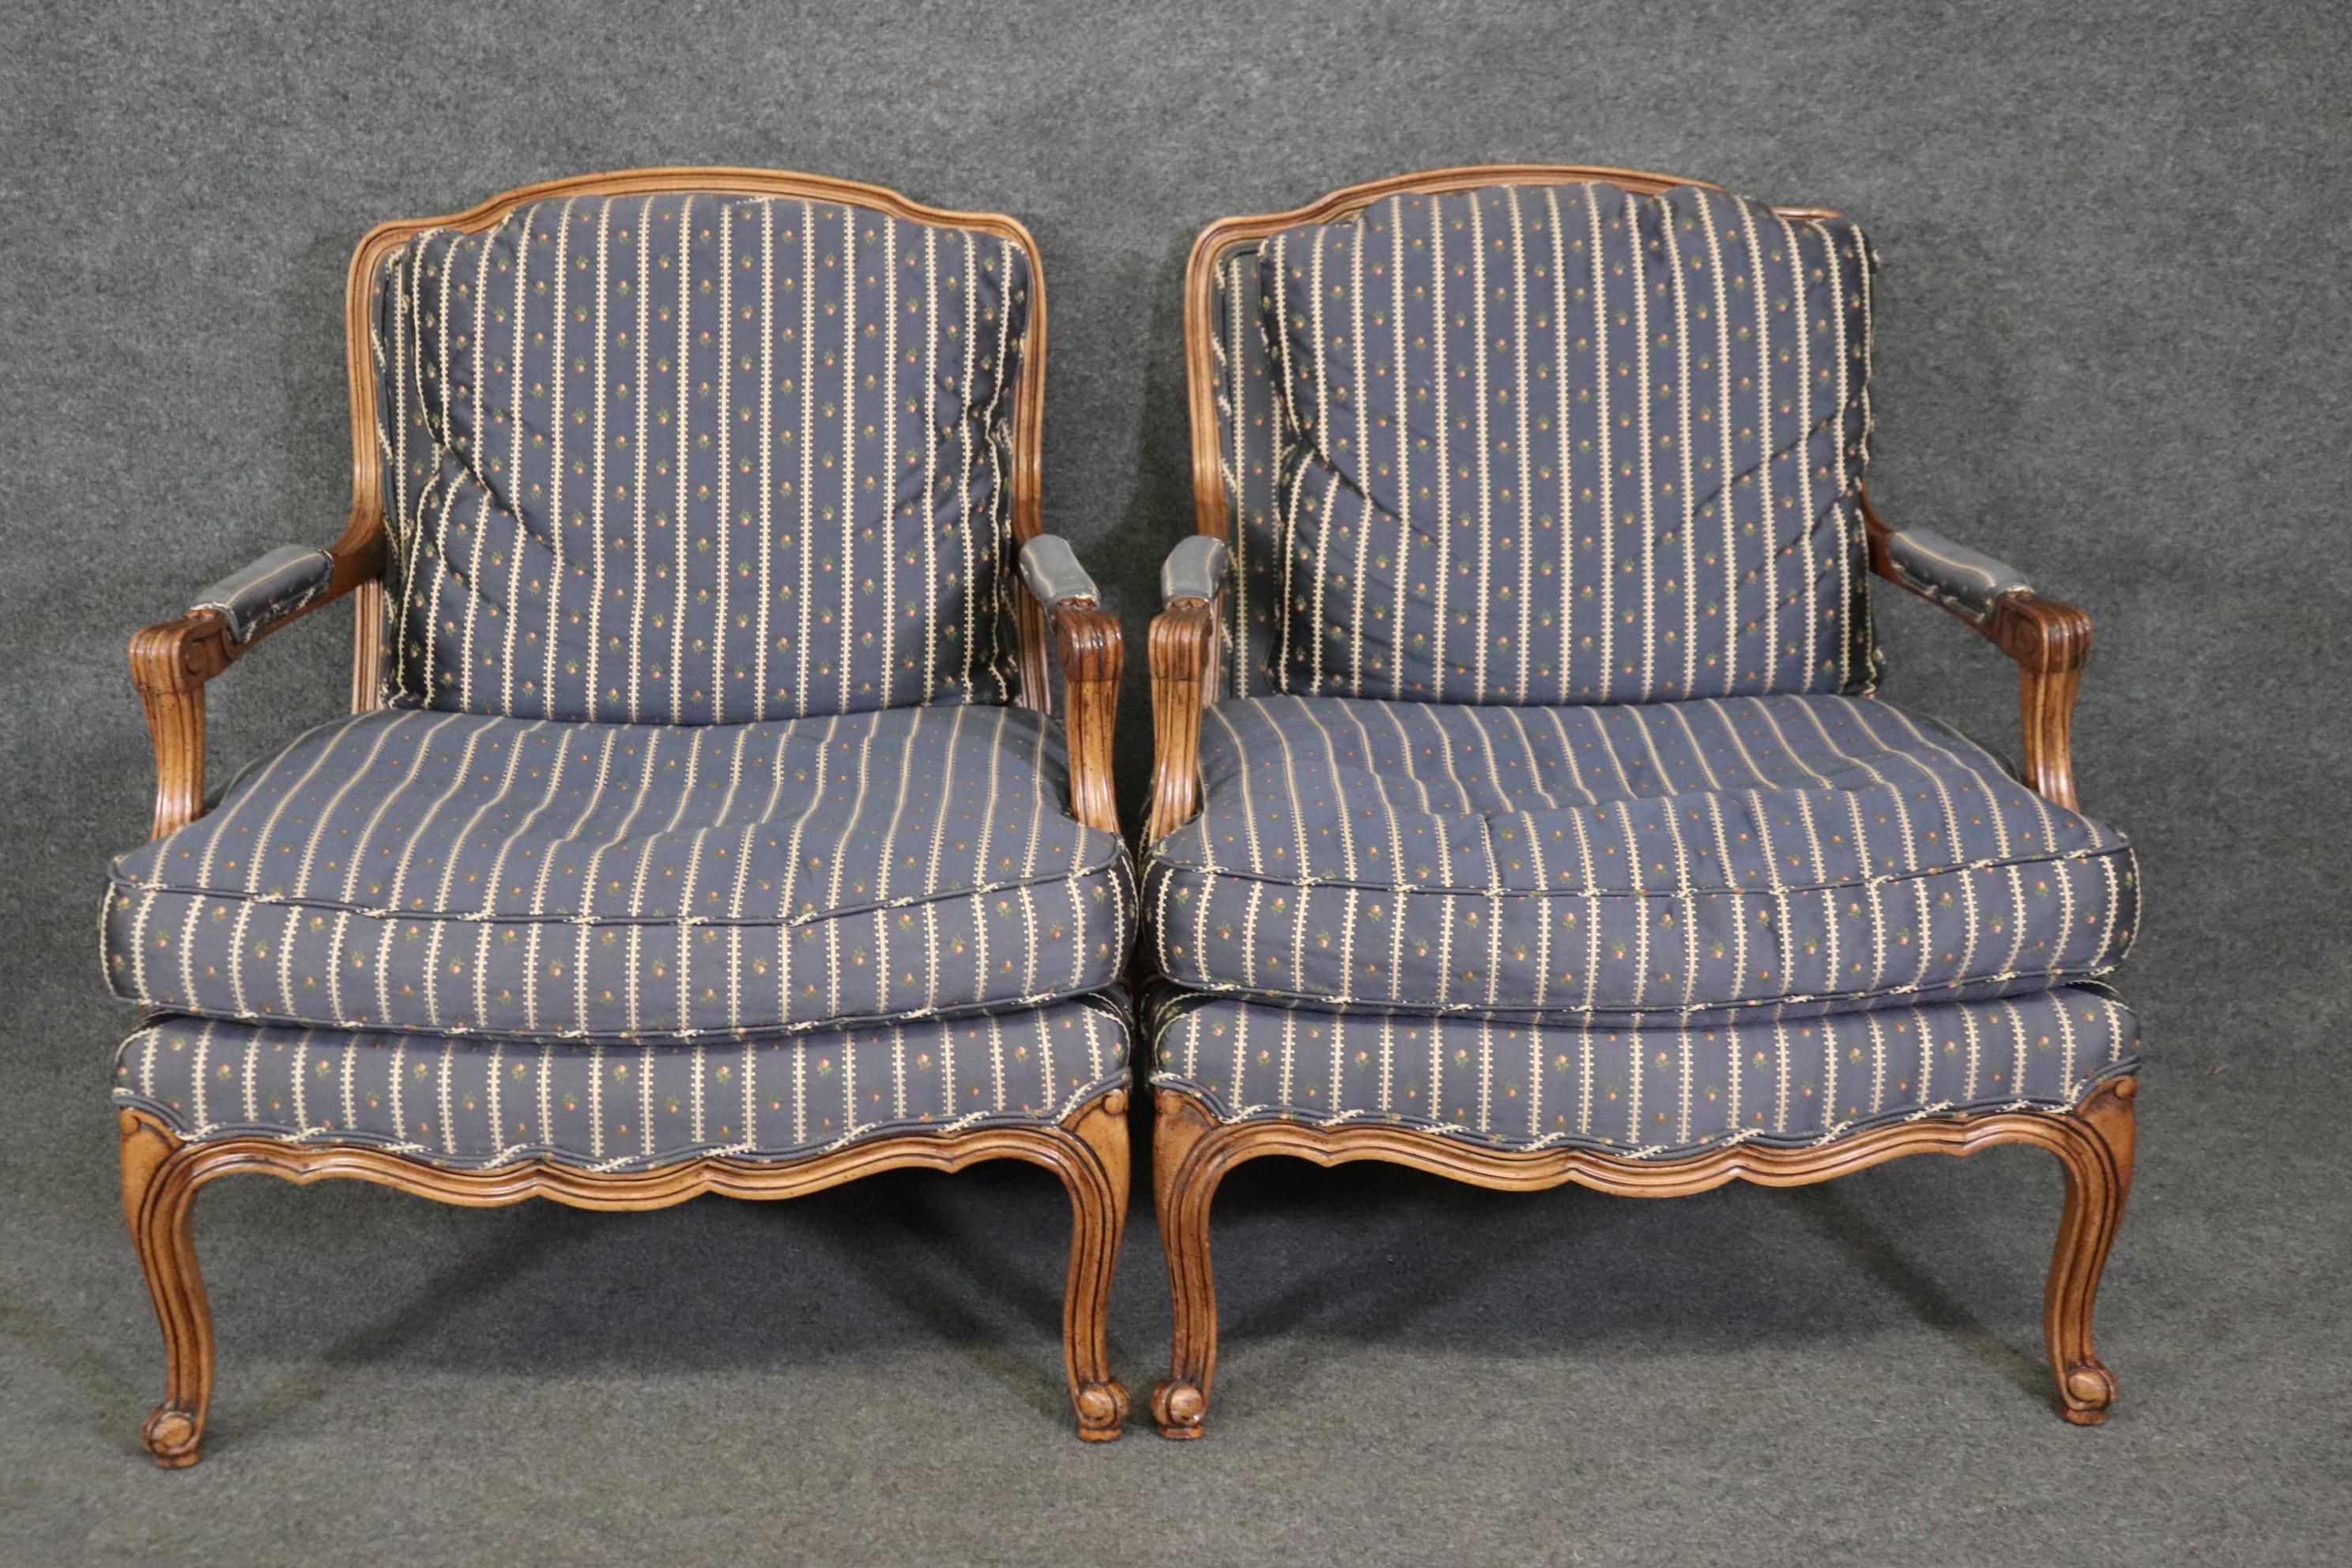 This isa nice pair of Baker chairs in good condition and they date to the 1970s era and measure 34.25 tall x 28.5 wide x 32.25 deep and the seat height is 17.5. They are in good condition. 



We can help with shipping to the ground floor or